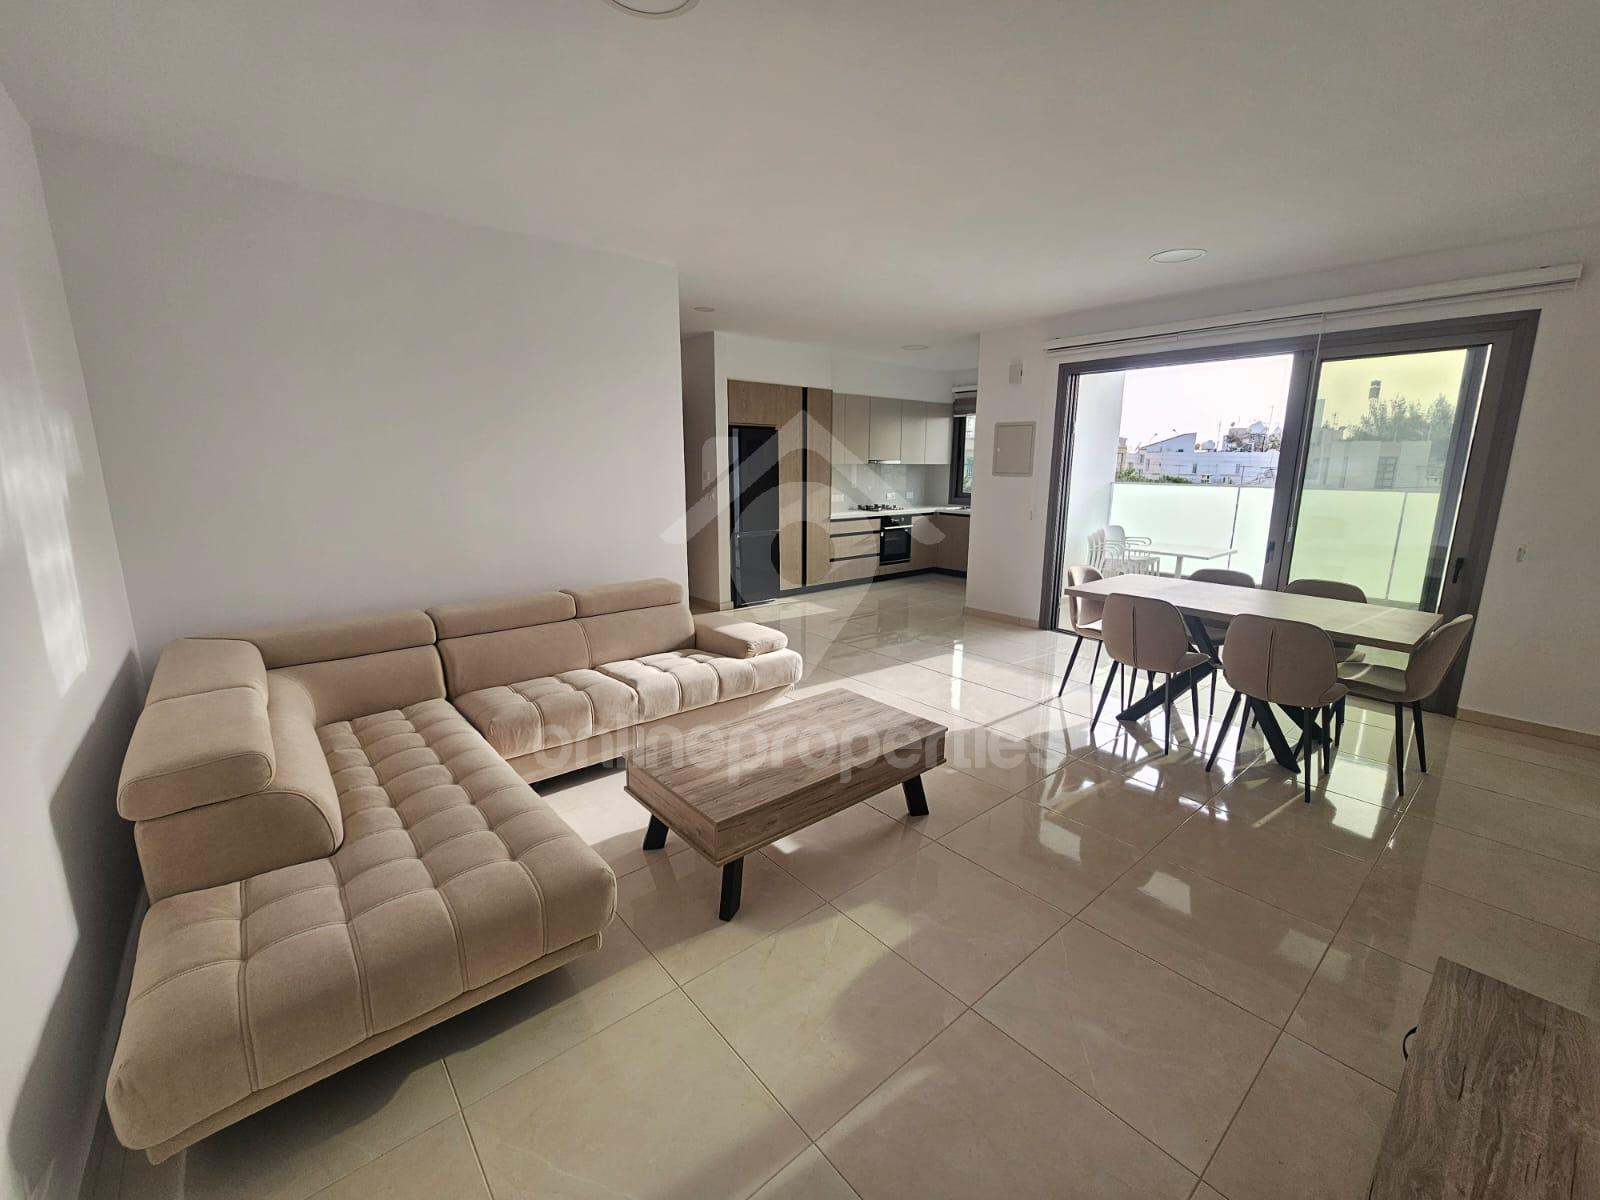 Spacious, Brand New Furnished 2-bedroom/Suite 102